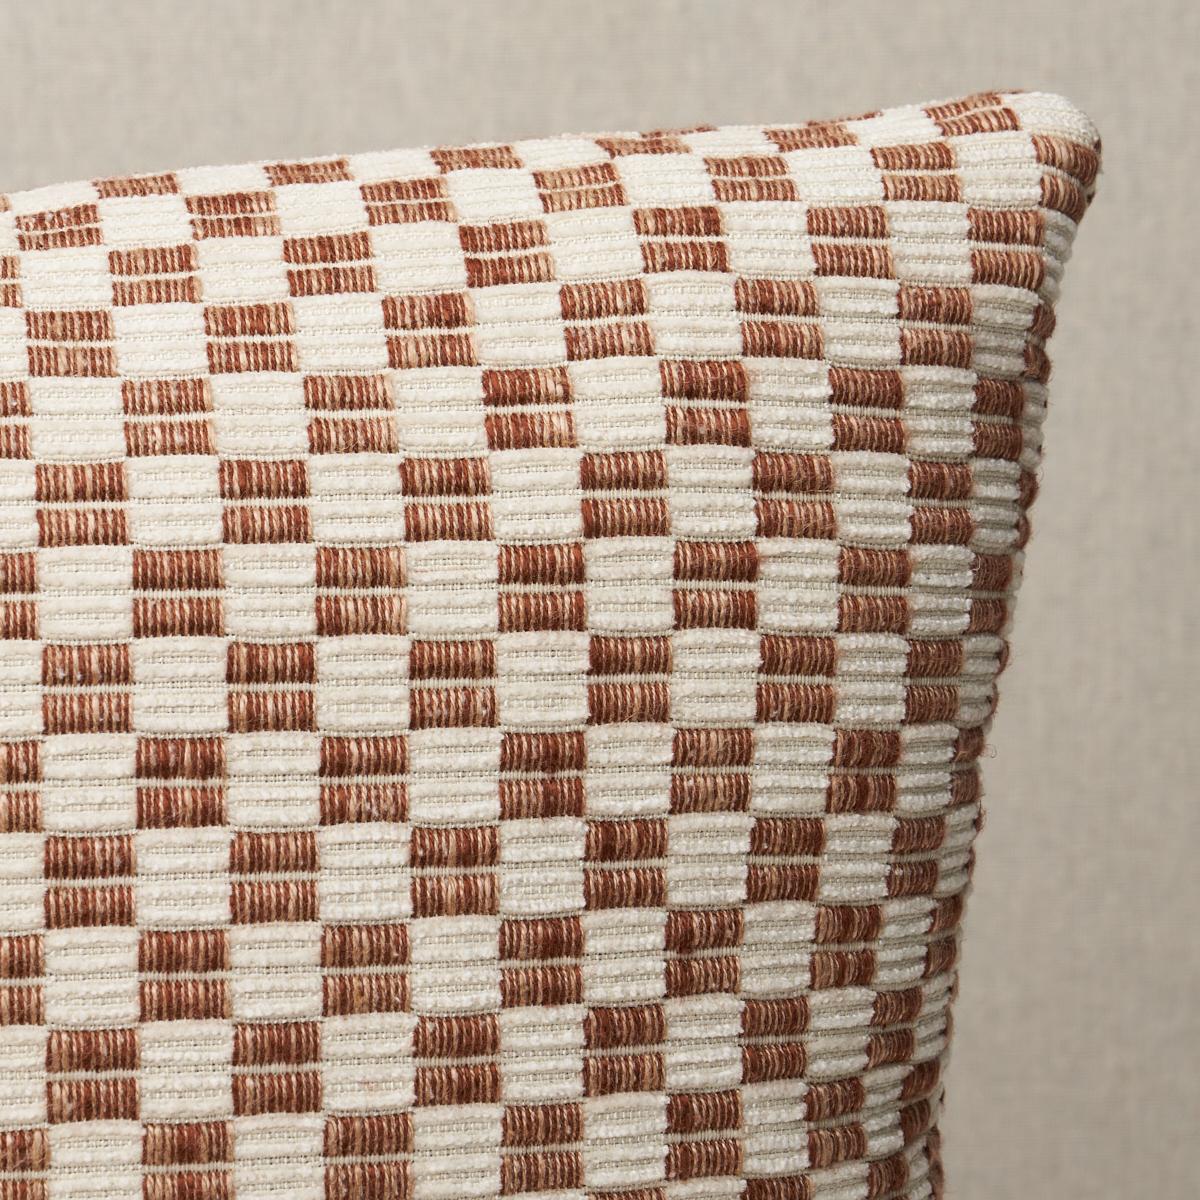 This pillow features Elkart with a knife edge finish. Elkhart is a soft, artisanal small woven check with a wonderfully homespun quality. Pillow includes a feather/down fill insert and hidden zipper closure. *If out of stock, lead-time is 15-20